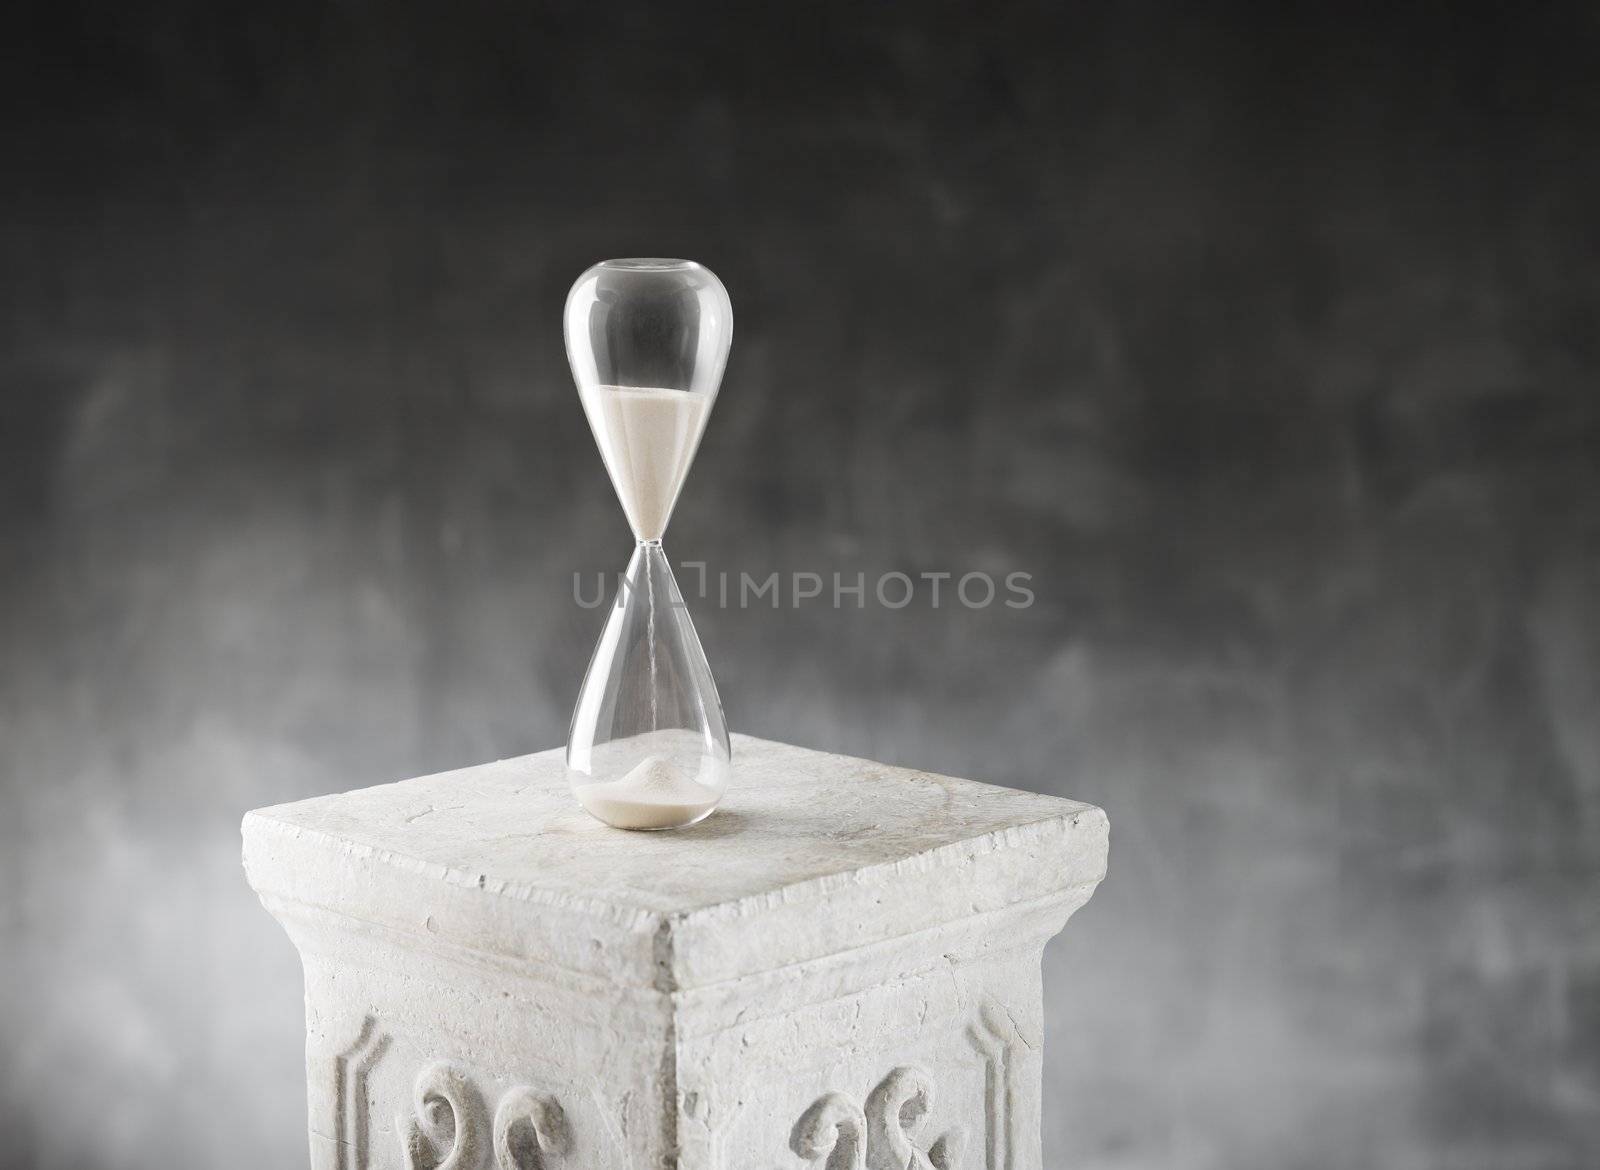 Hourglass by Stocksnapper